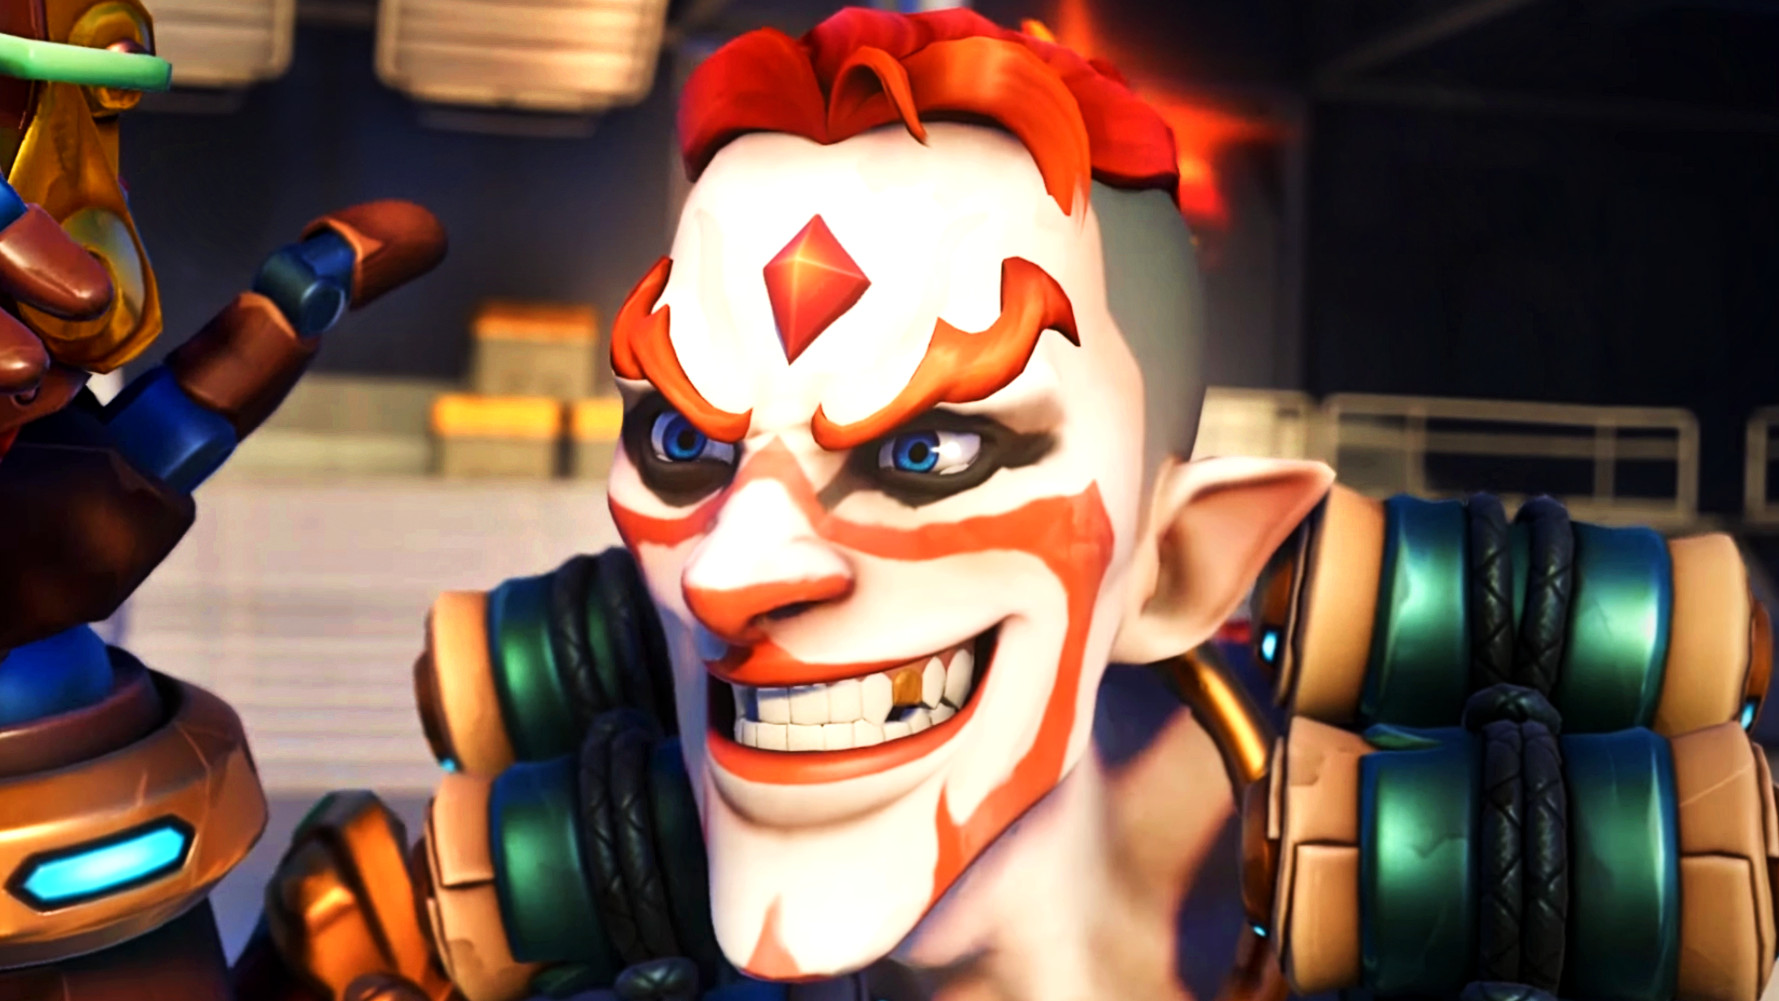 Overwatch 2 Junkrat and Cassidy reworks are in development